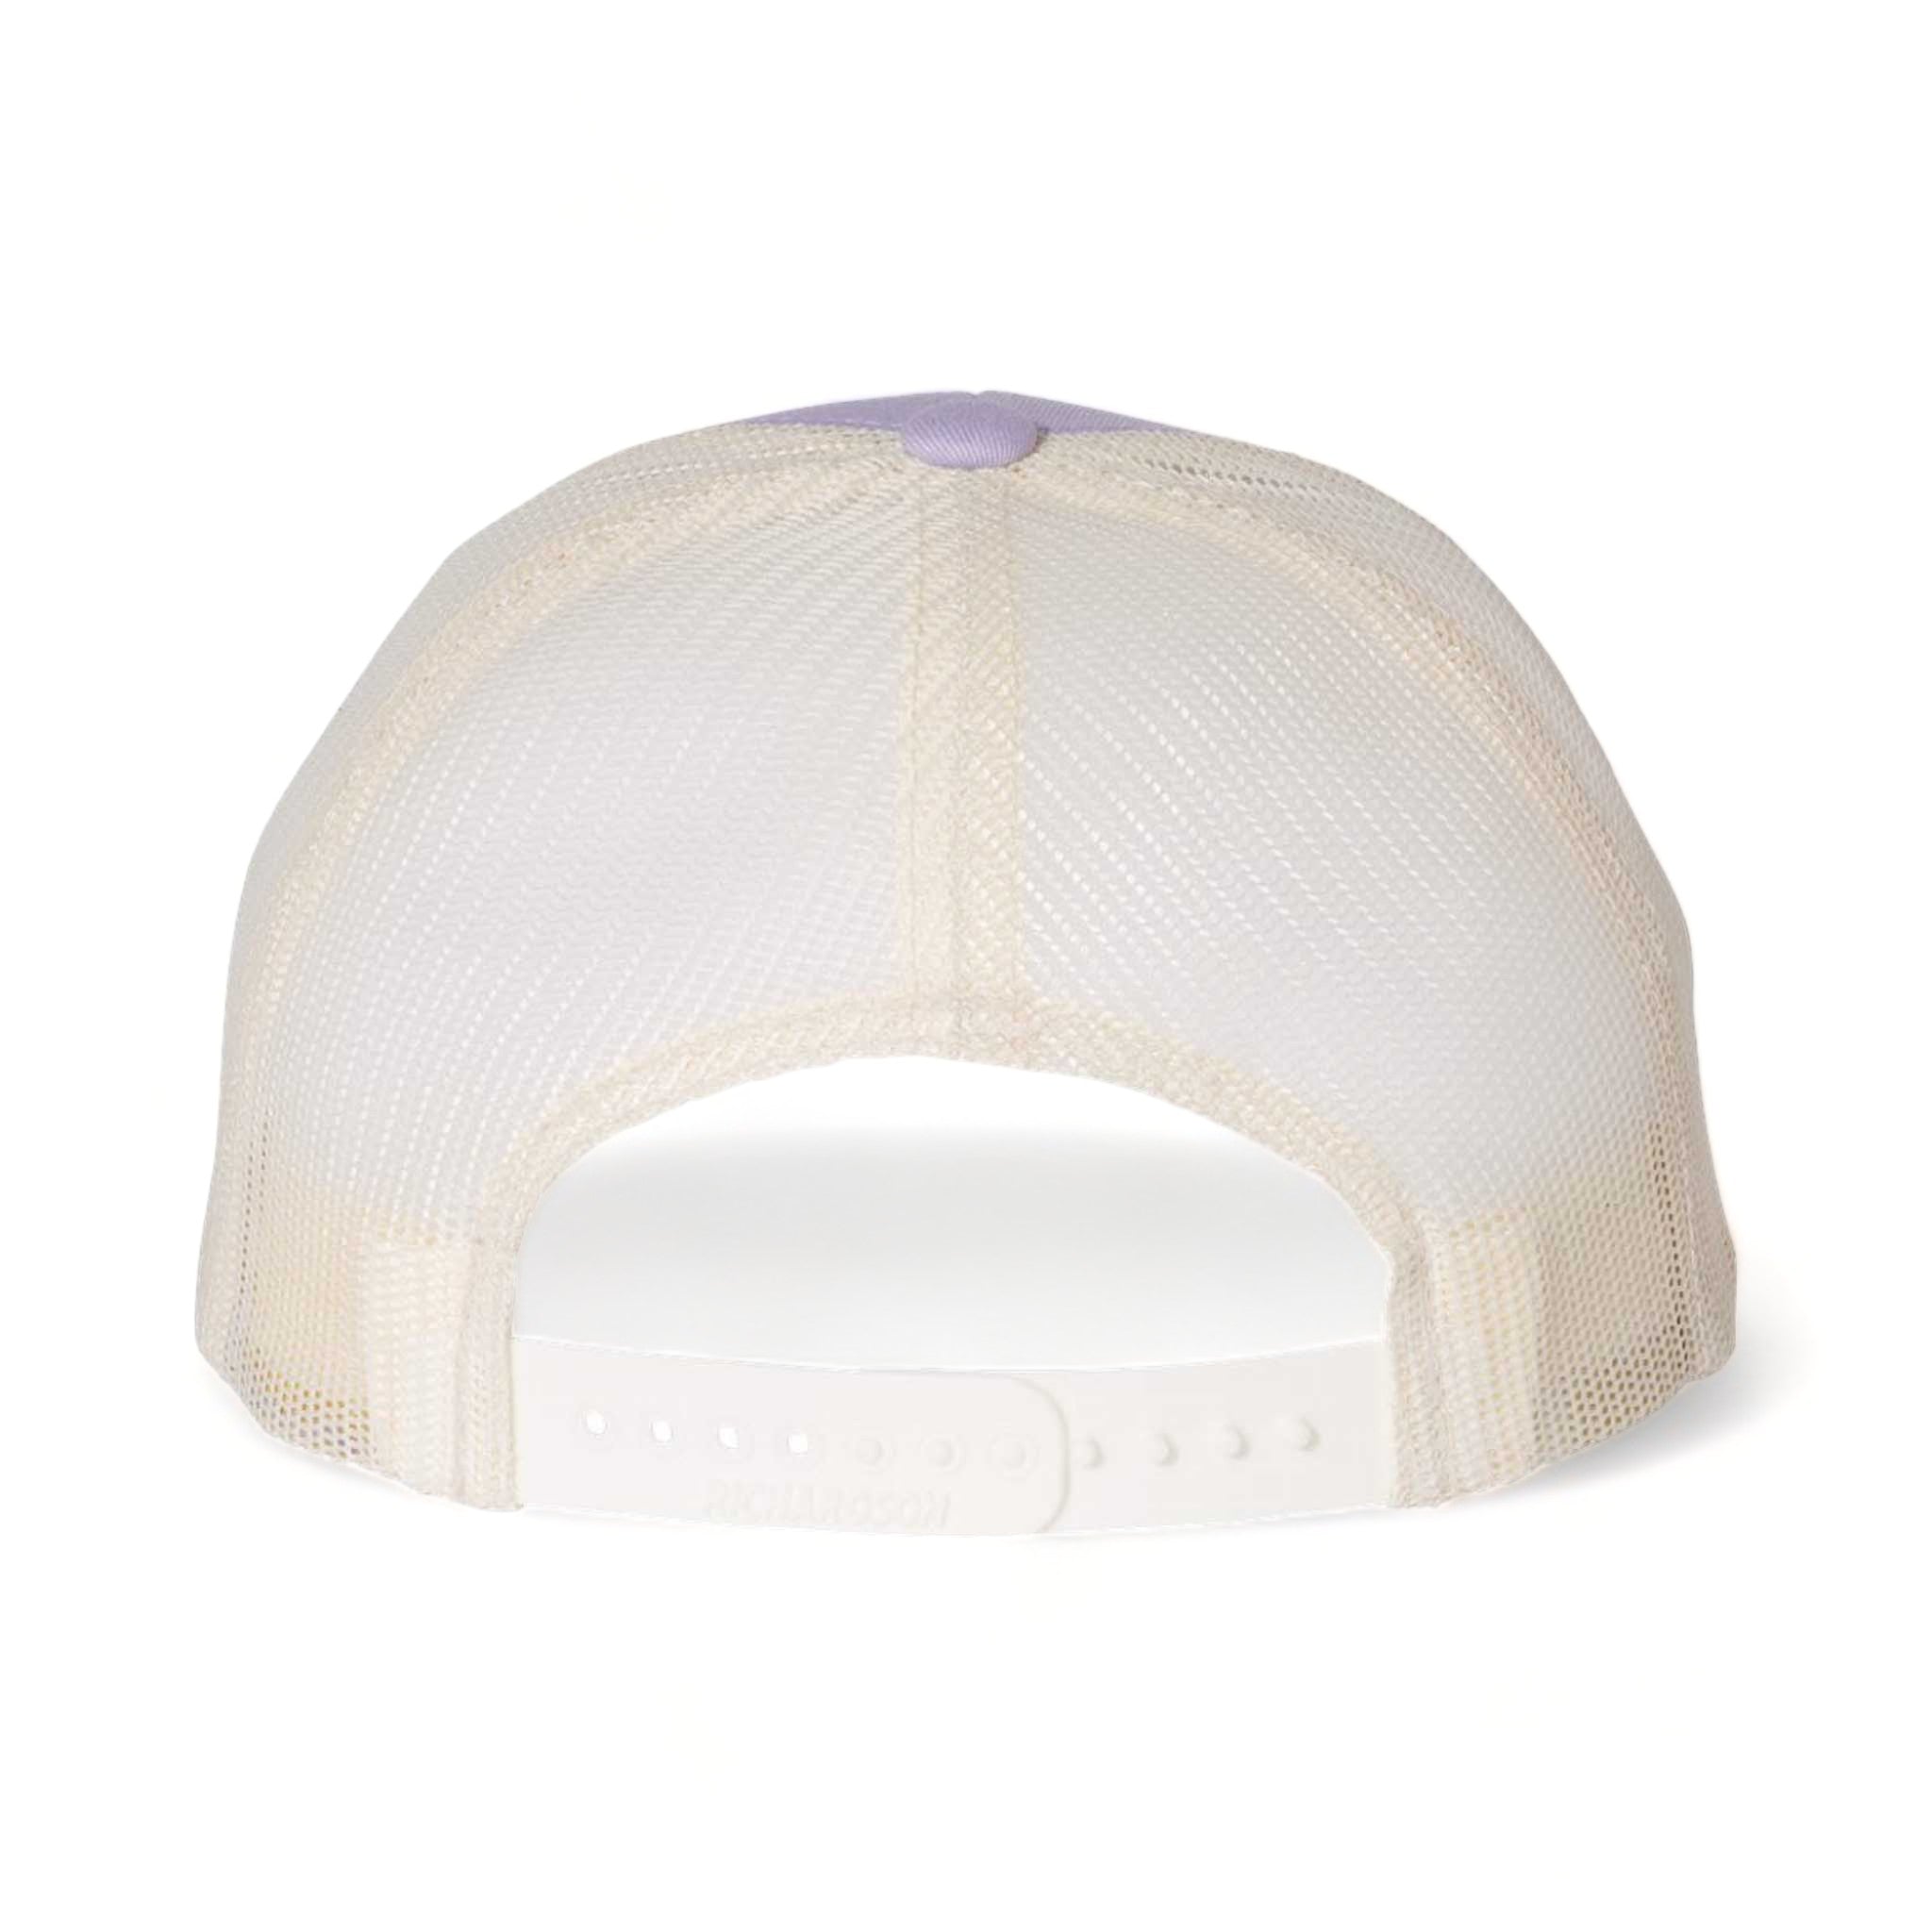 Back view of Richardson 115 custom hat in lilac and birch